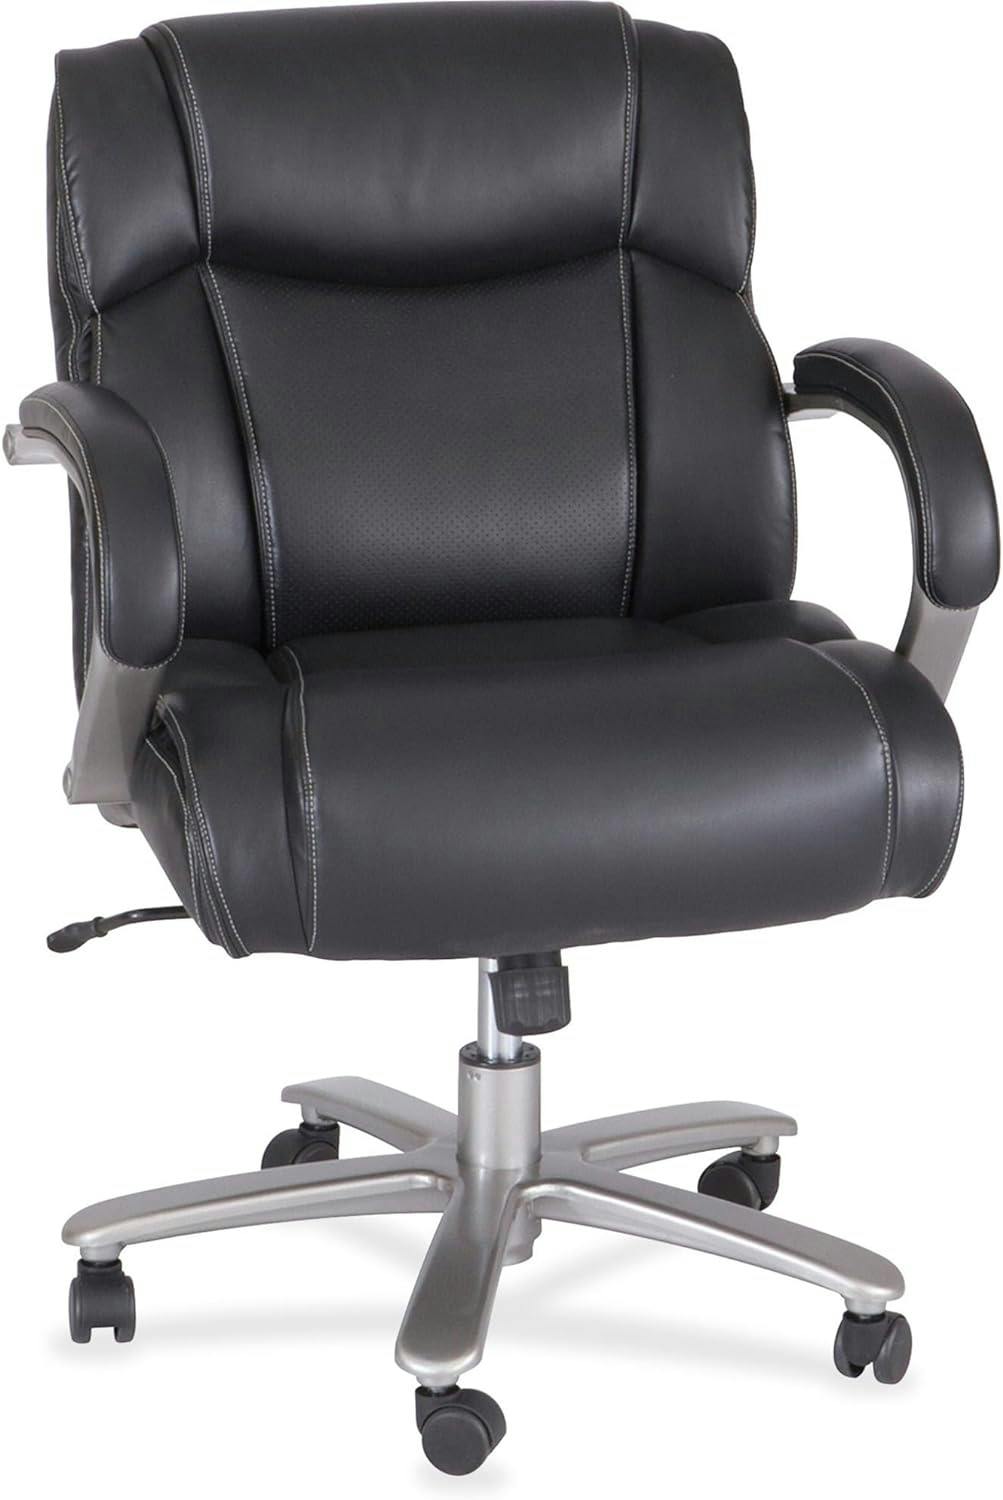 Executive High-Back Swivel Chair with Leather and Metal Accents